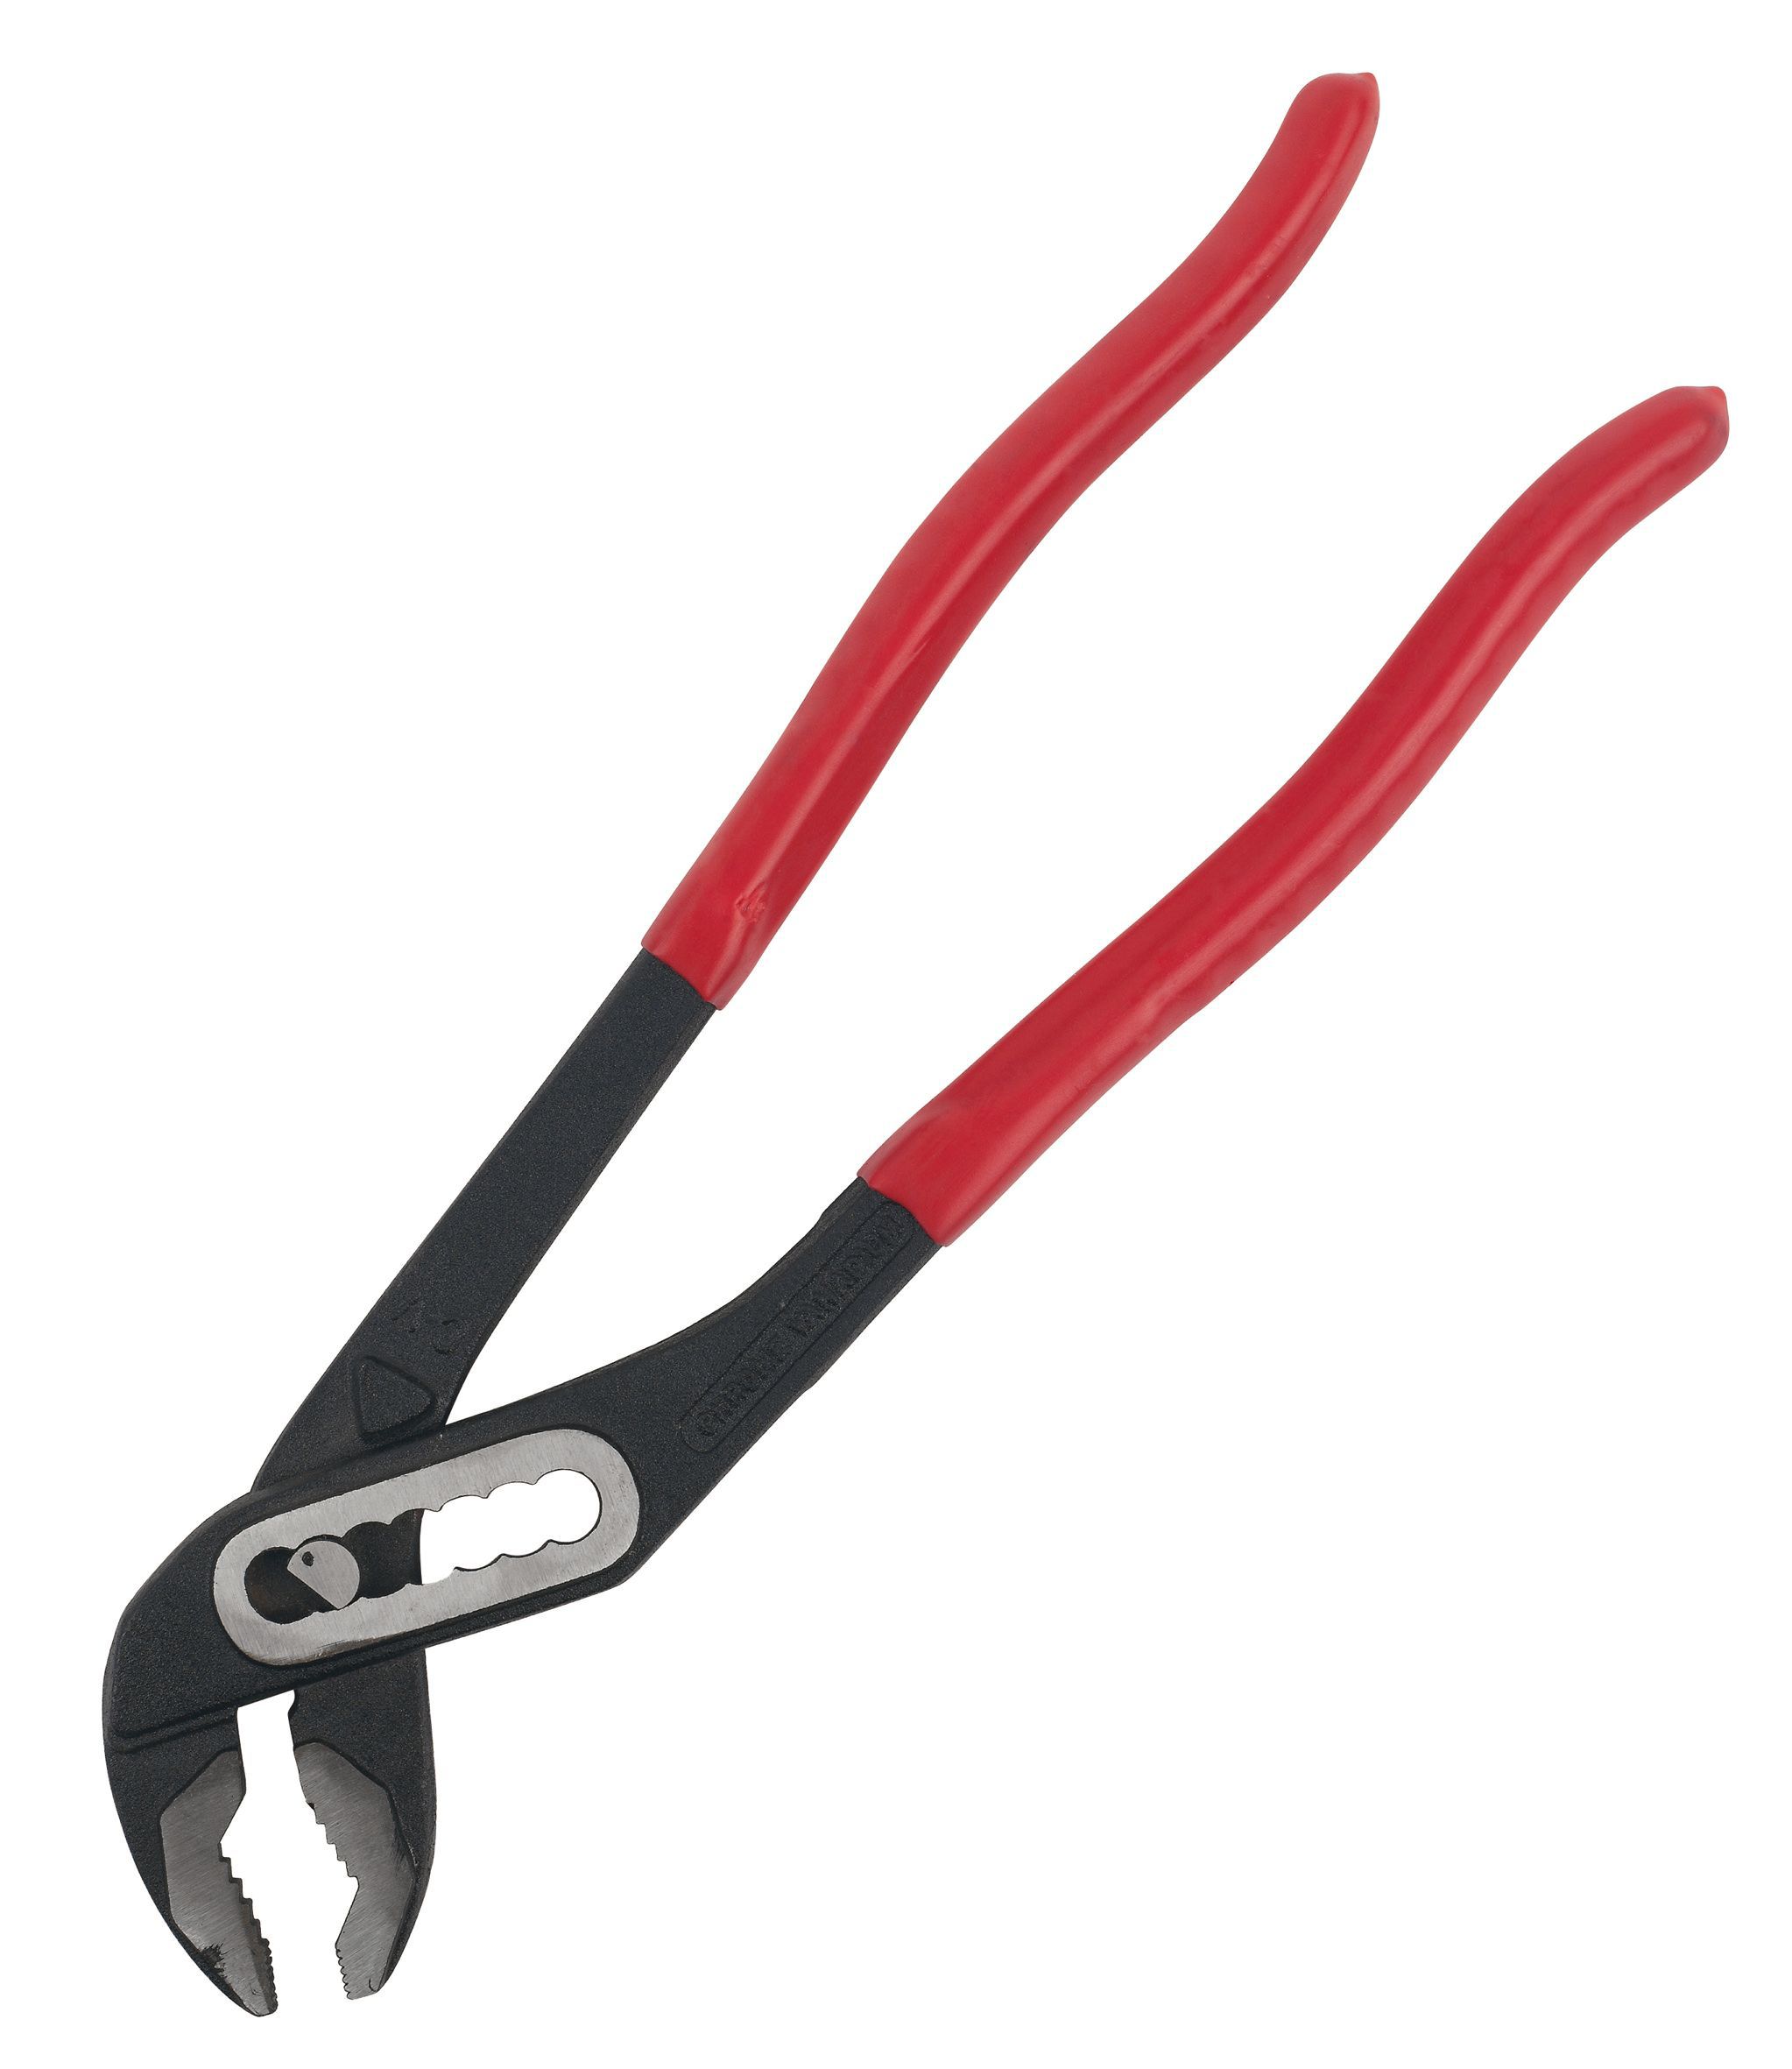 Rothenberger Water pump pliers